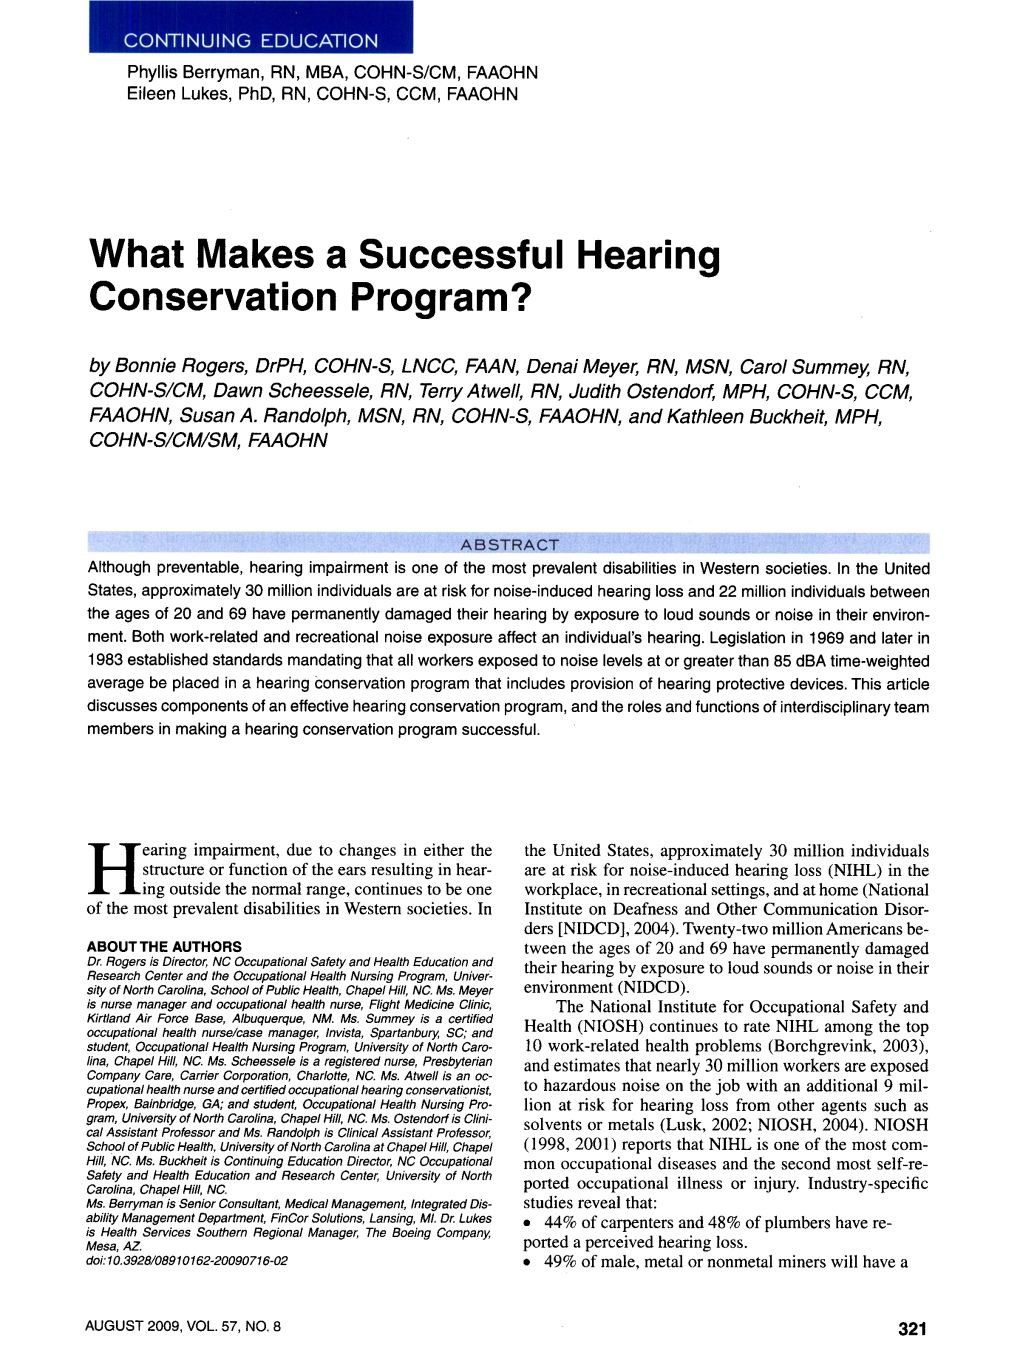 What Makes a Successful Hearing Conservation Program?